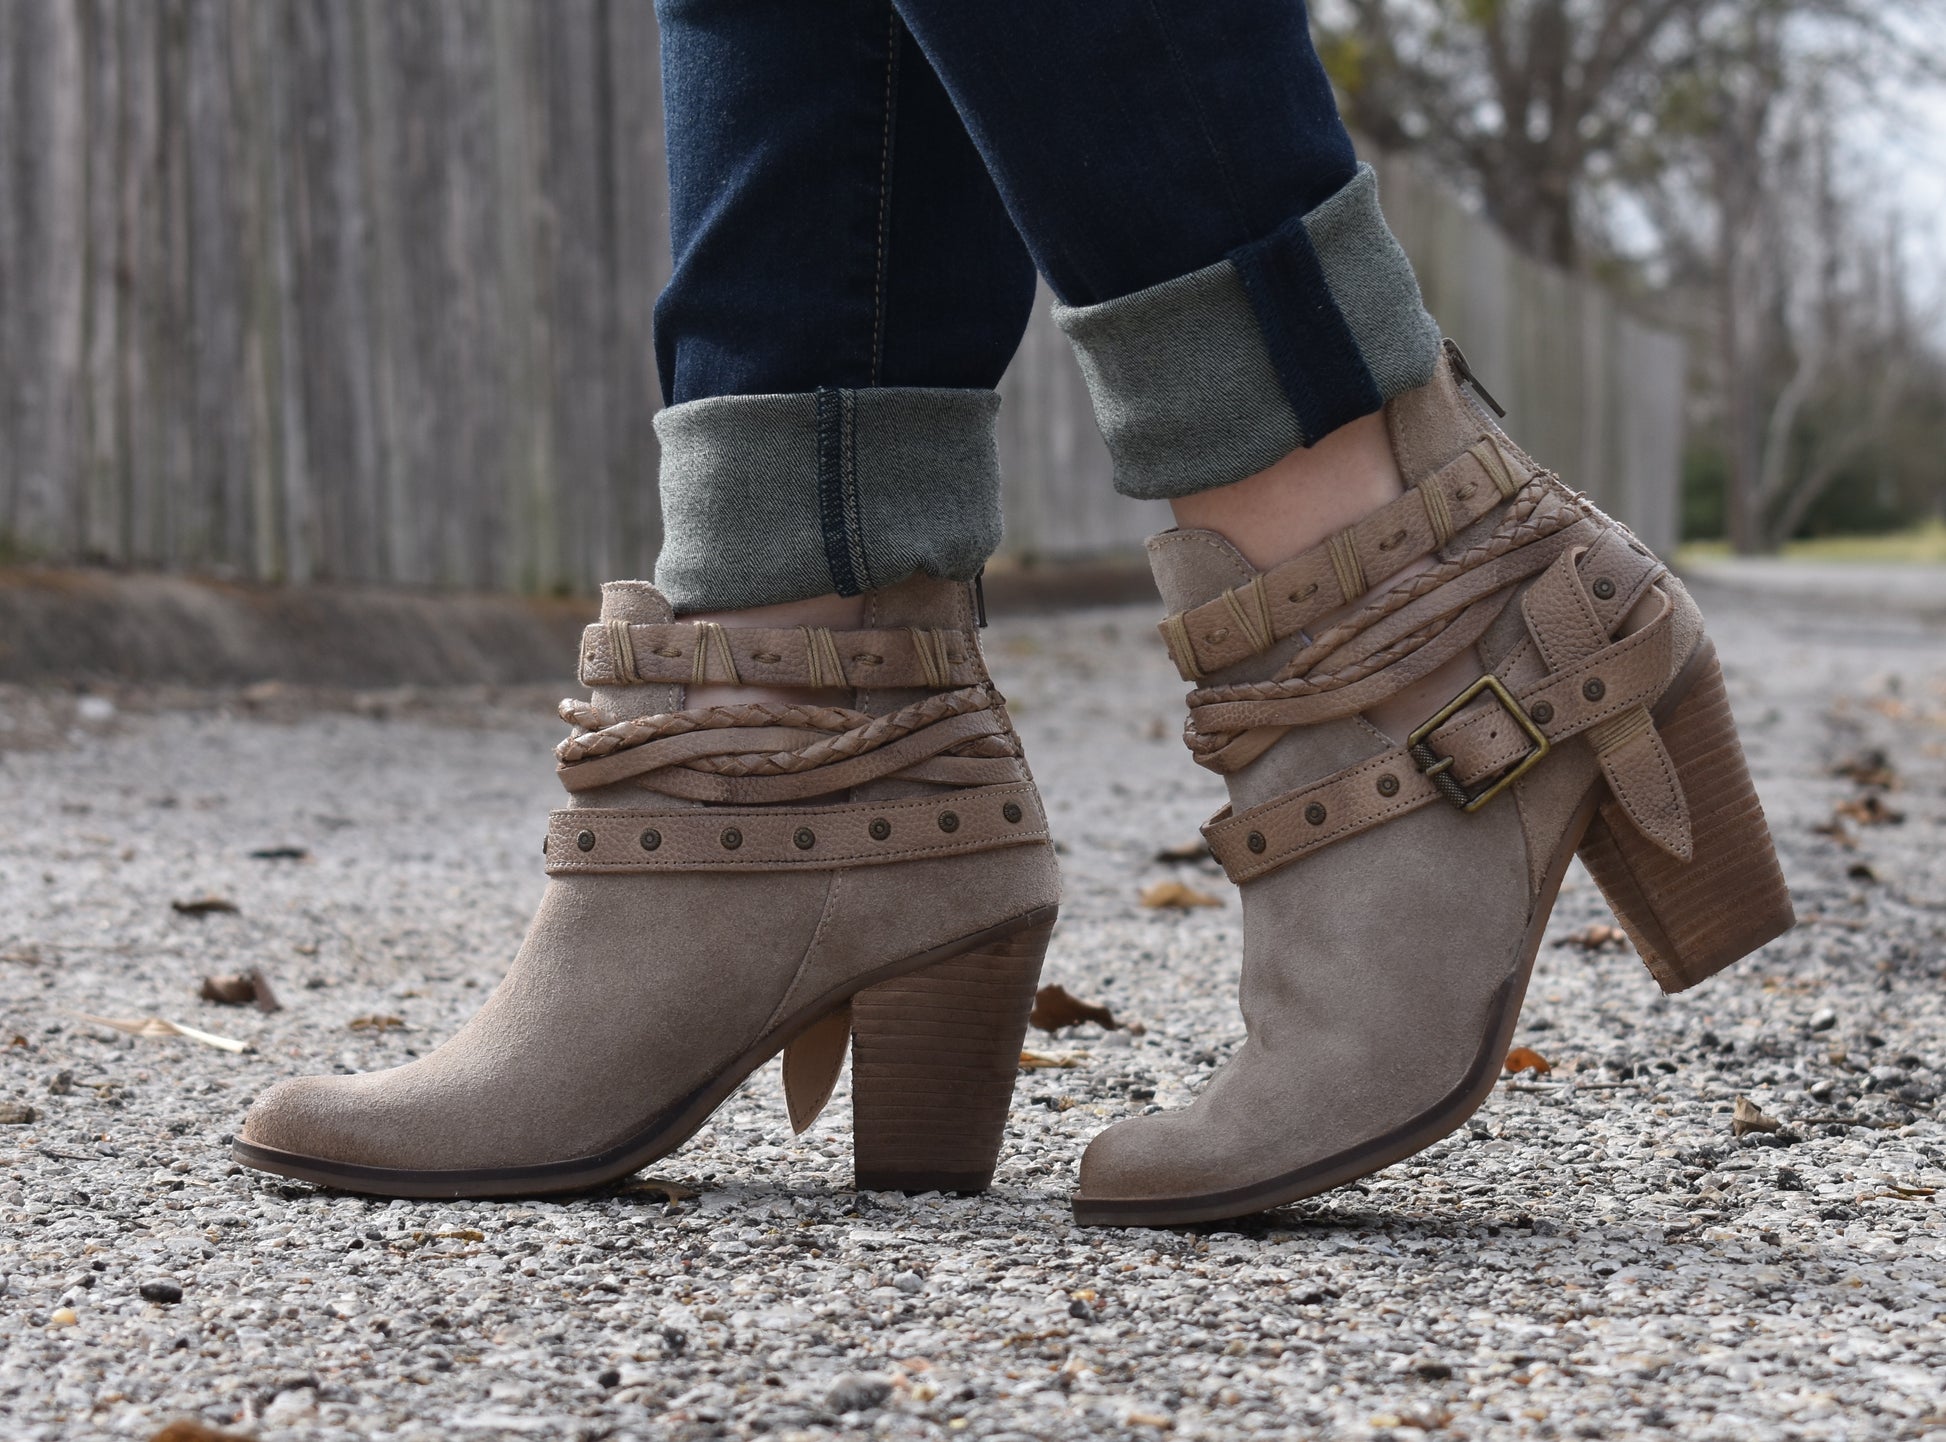 Cuthbert Booties – The Grapevine Boutique